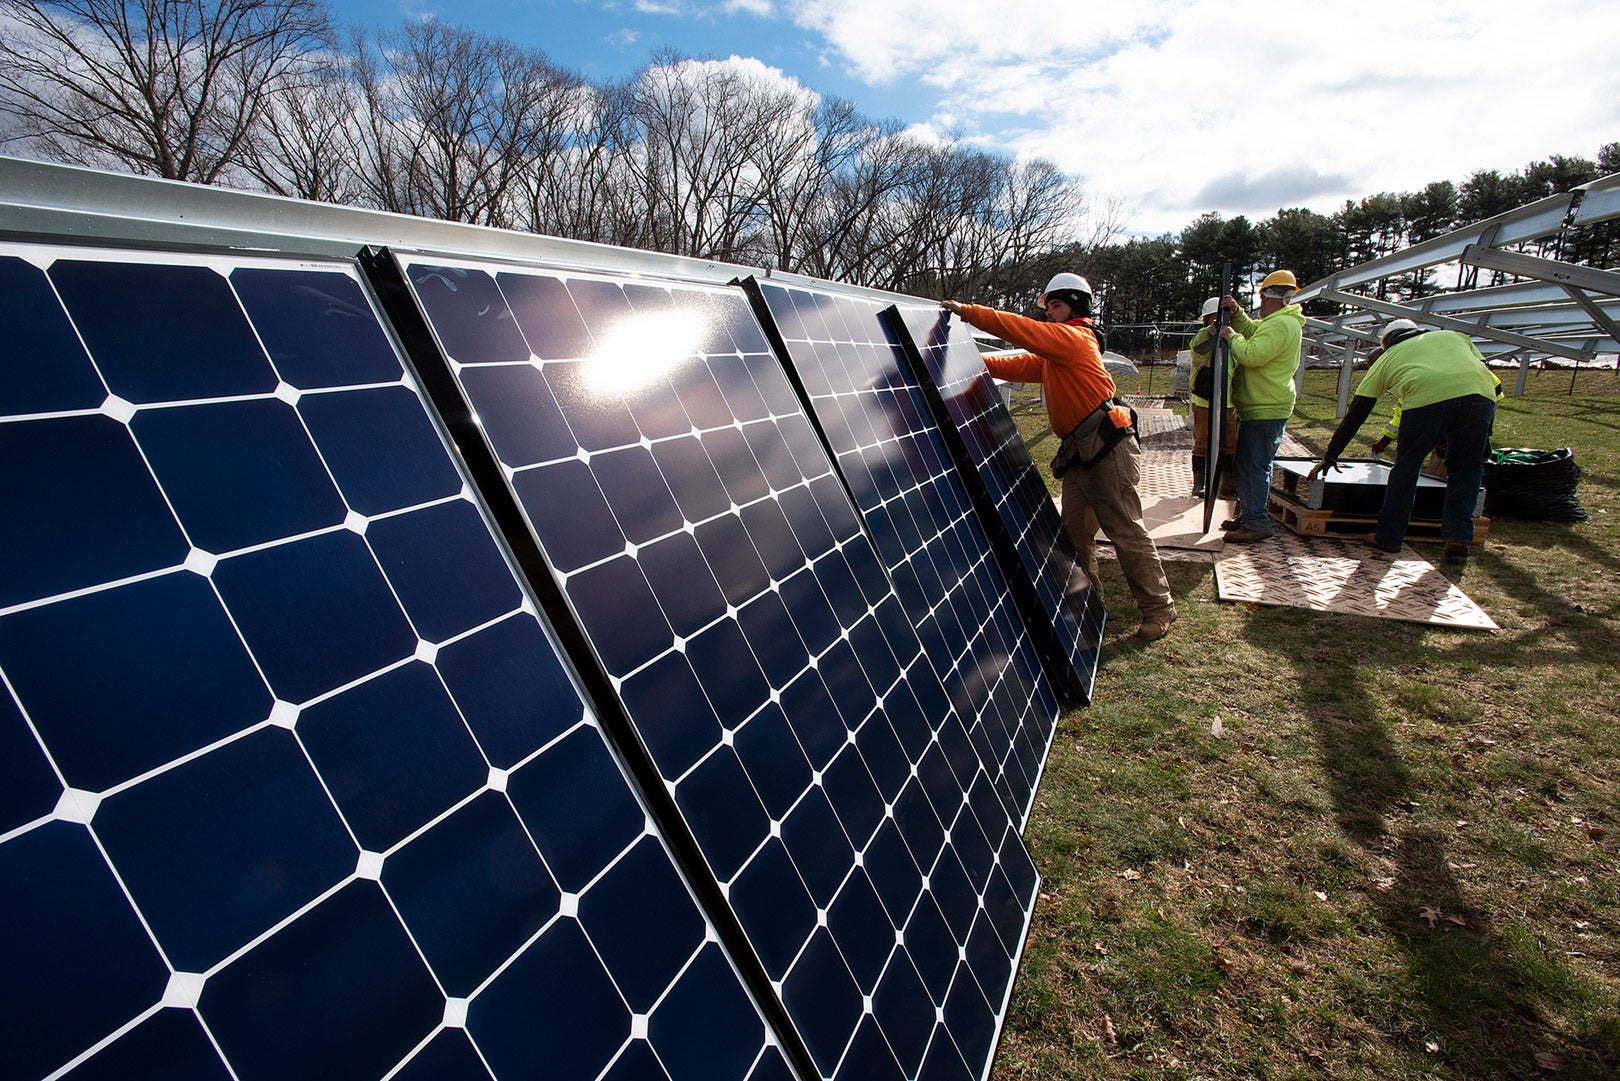 Construction workers erect solar panels